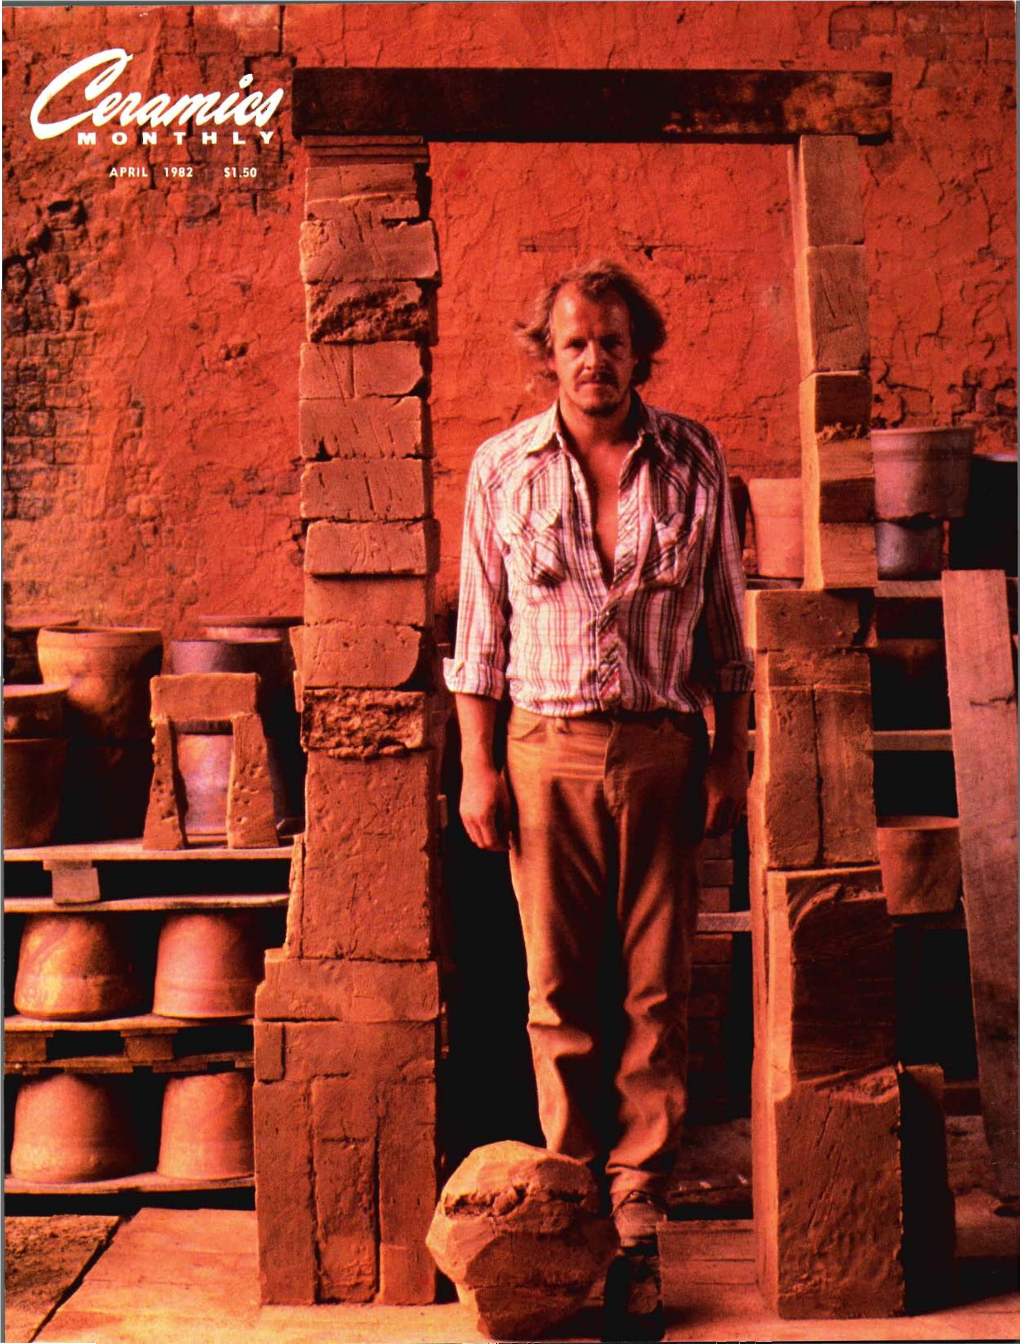 Ceramics Monthly Volume 30, Number 4 April 1982 Features Louise and Satoshi Doucet-Saito by D